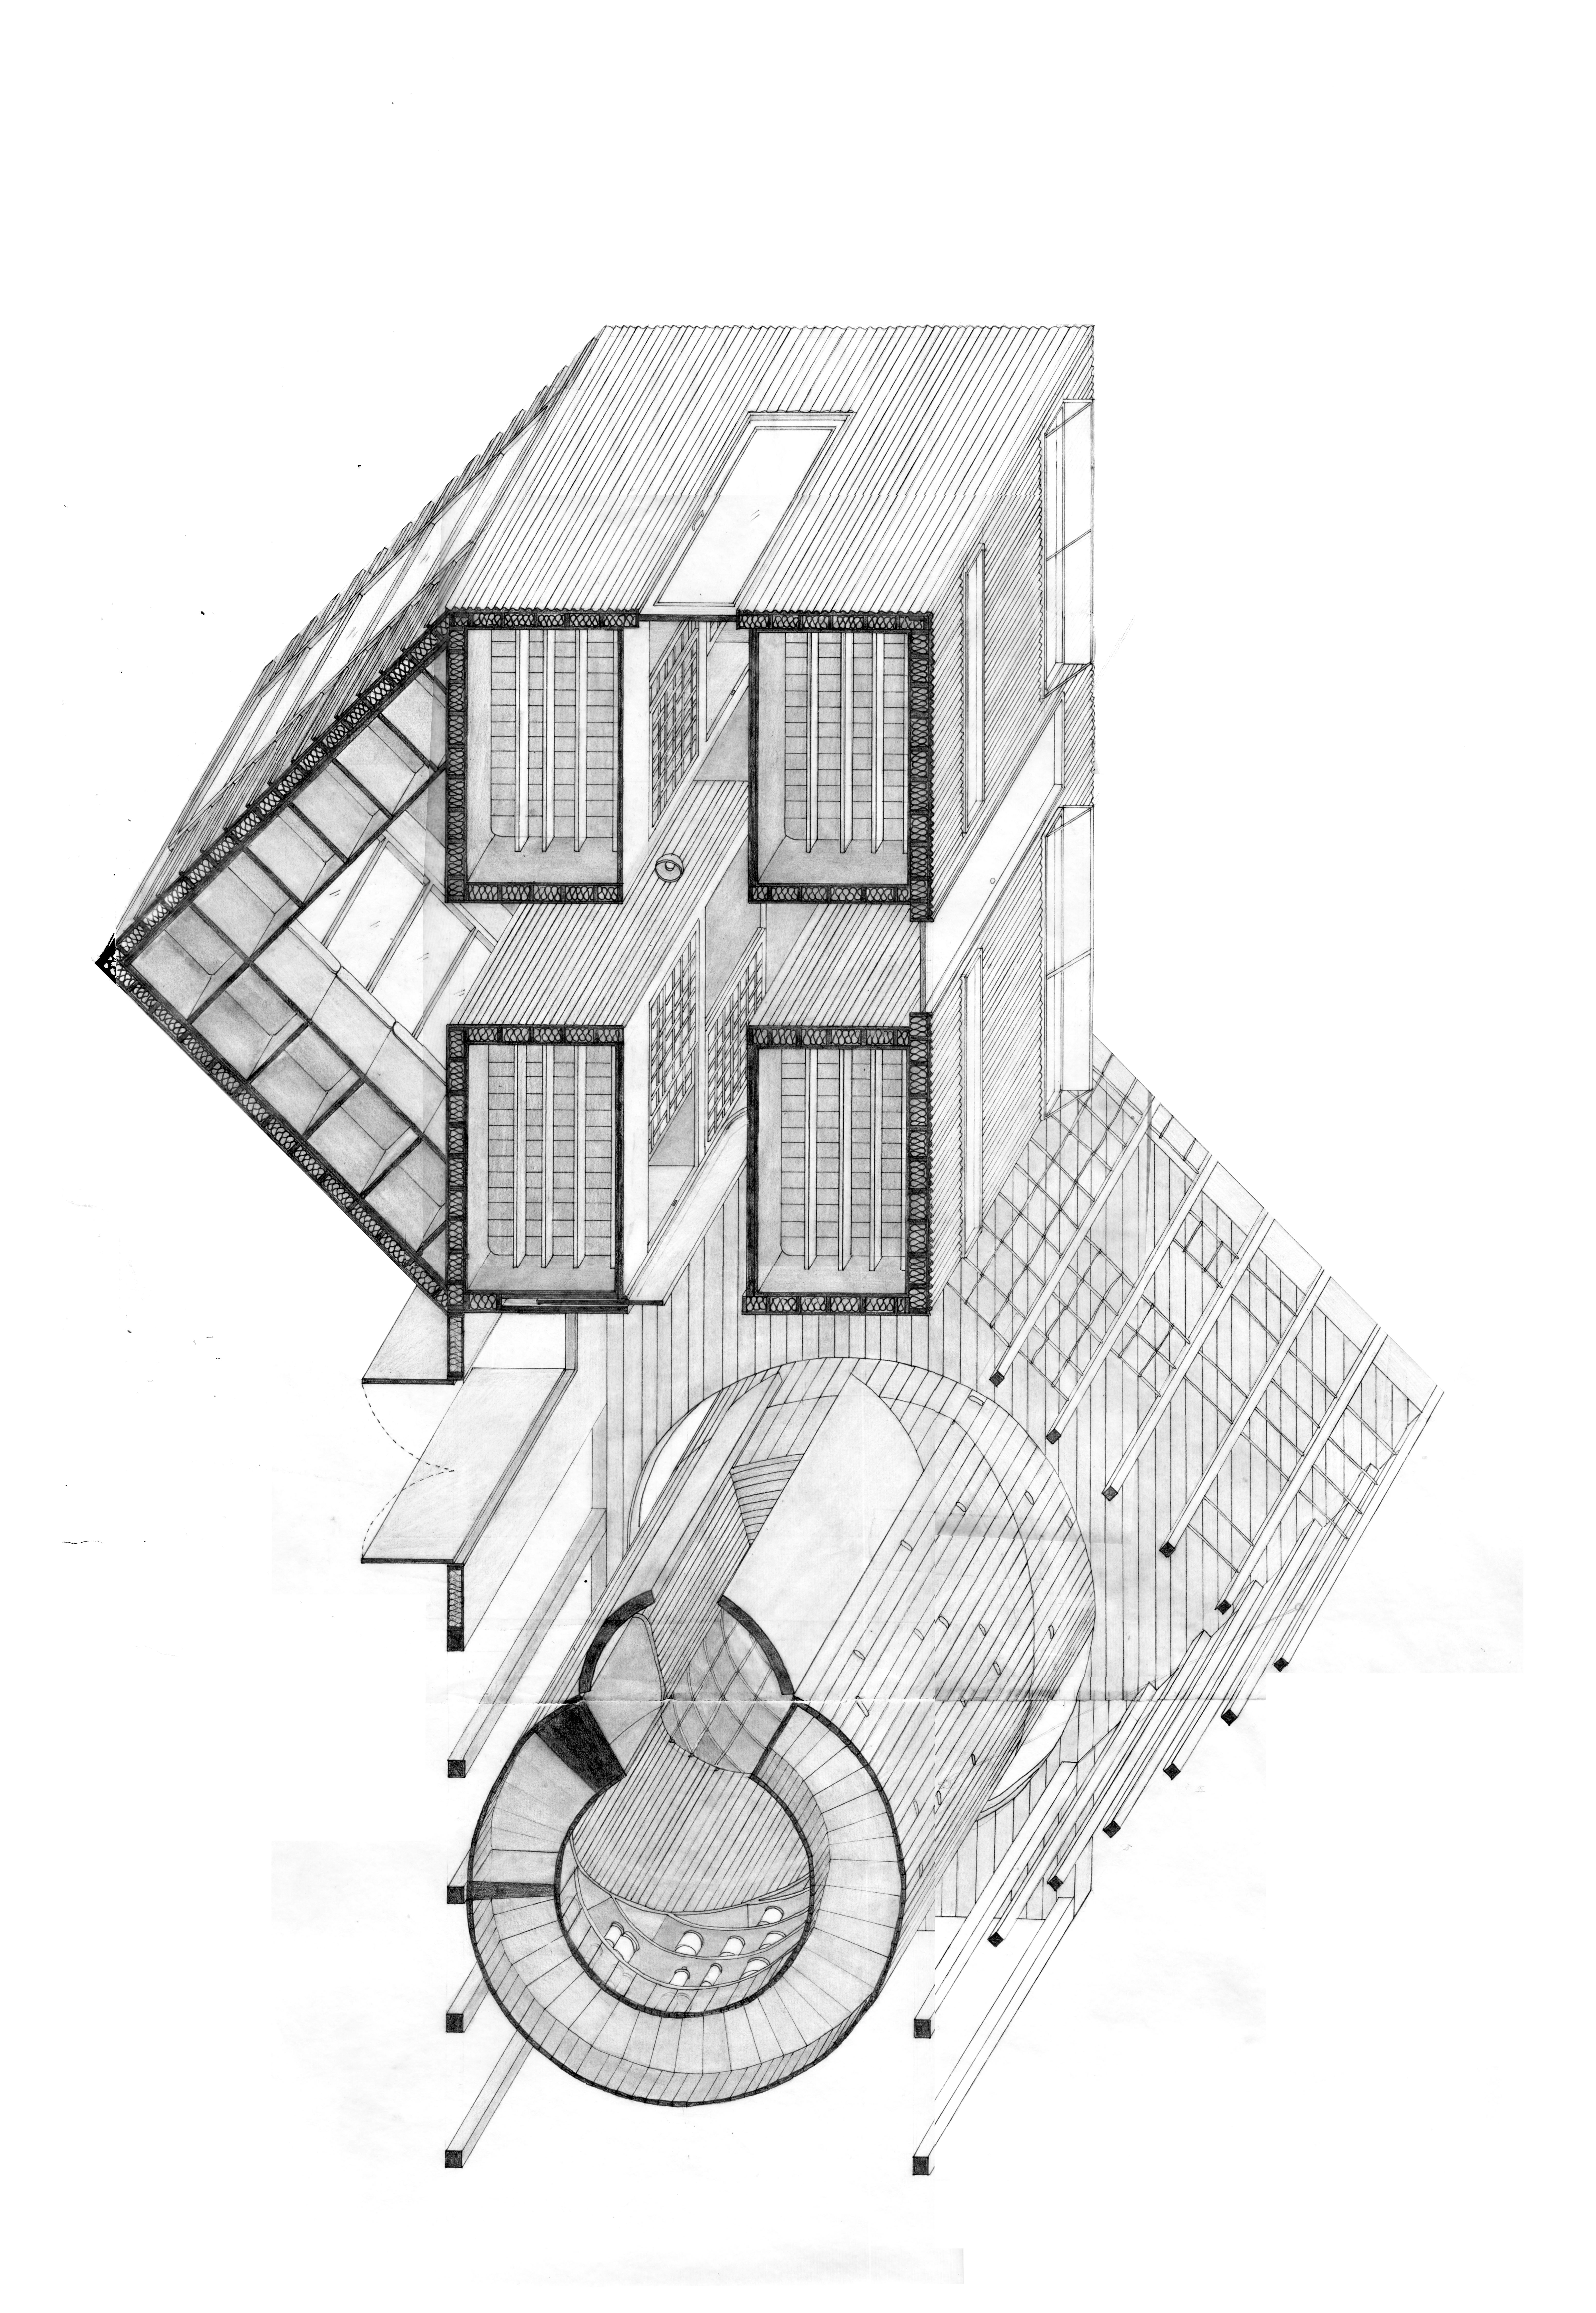 A shaded with graphite black and white illustration of a large space filled with different types of sleeping spaces from bunks to hammocks to beds.